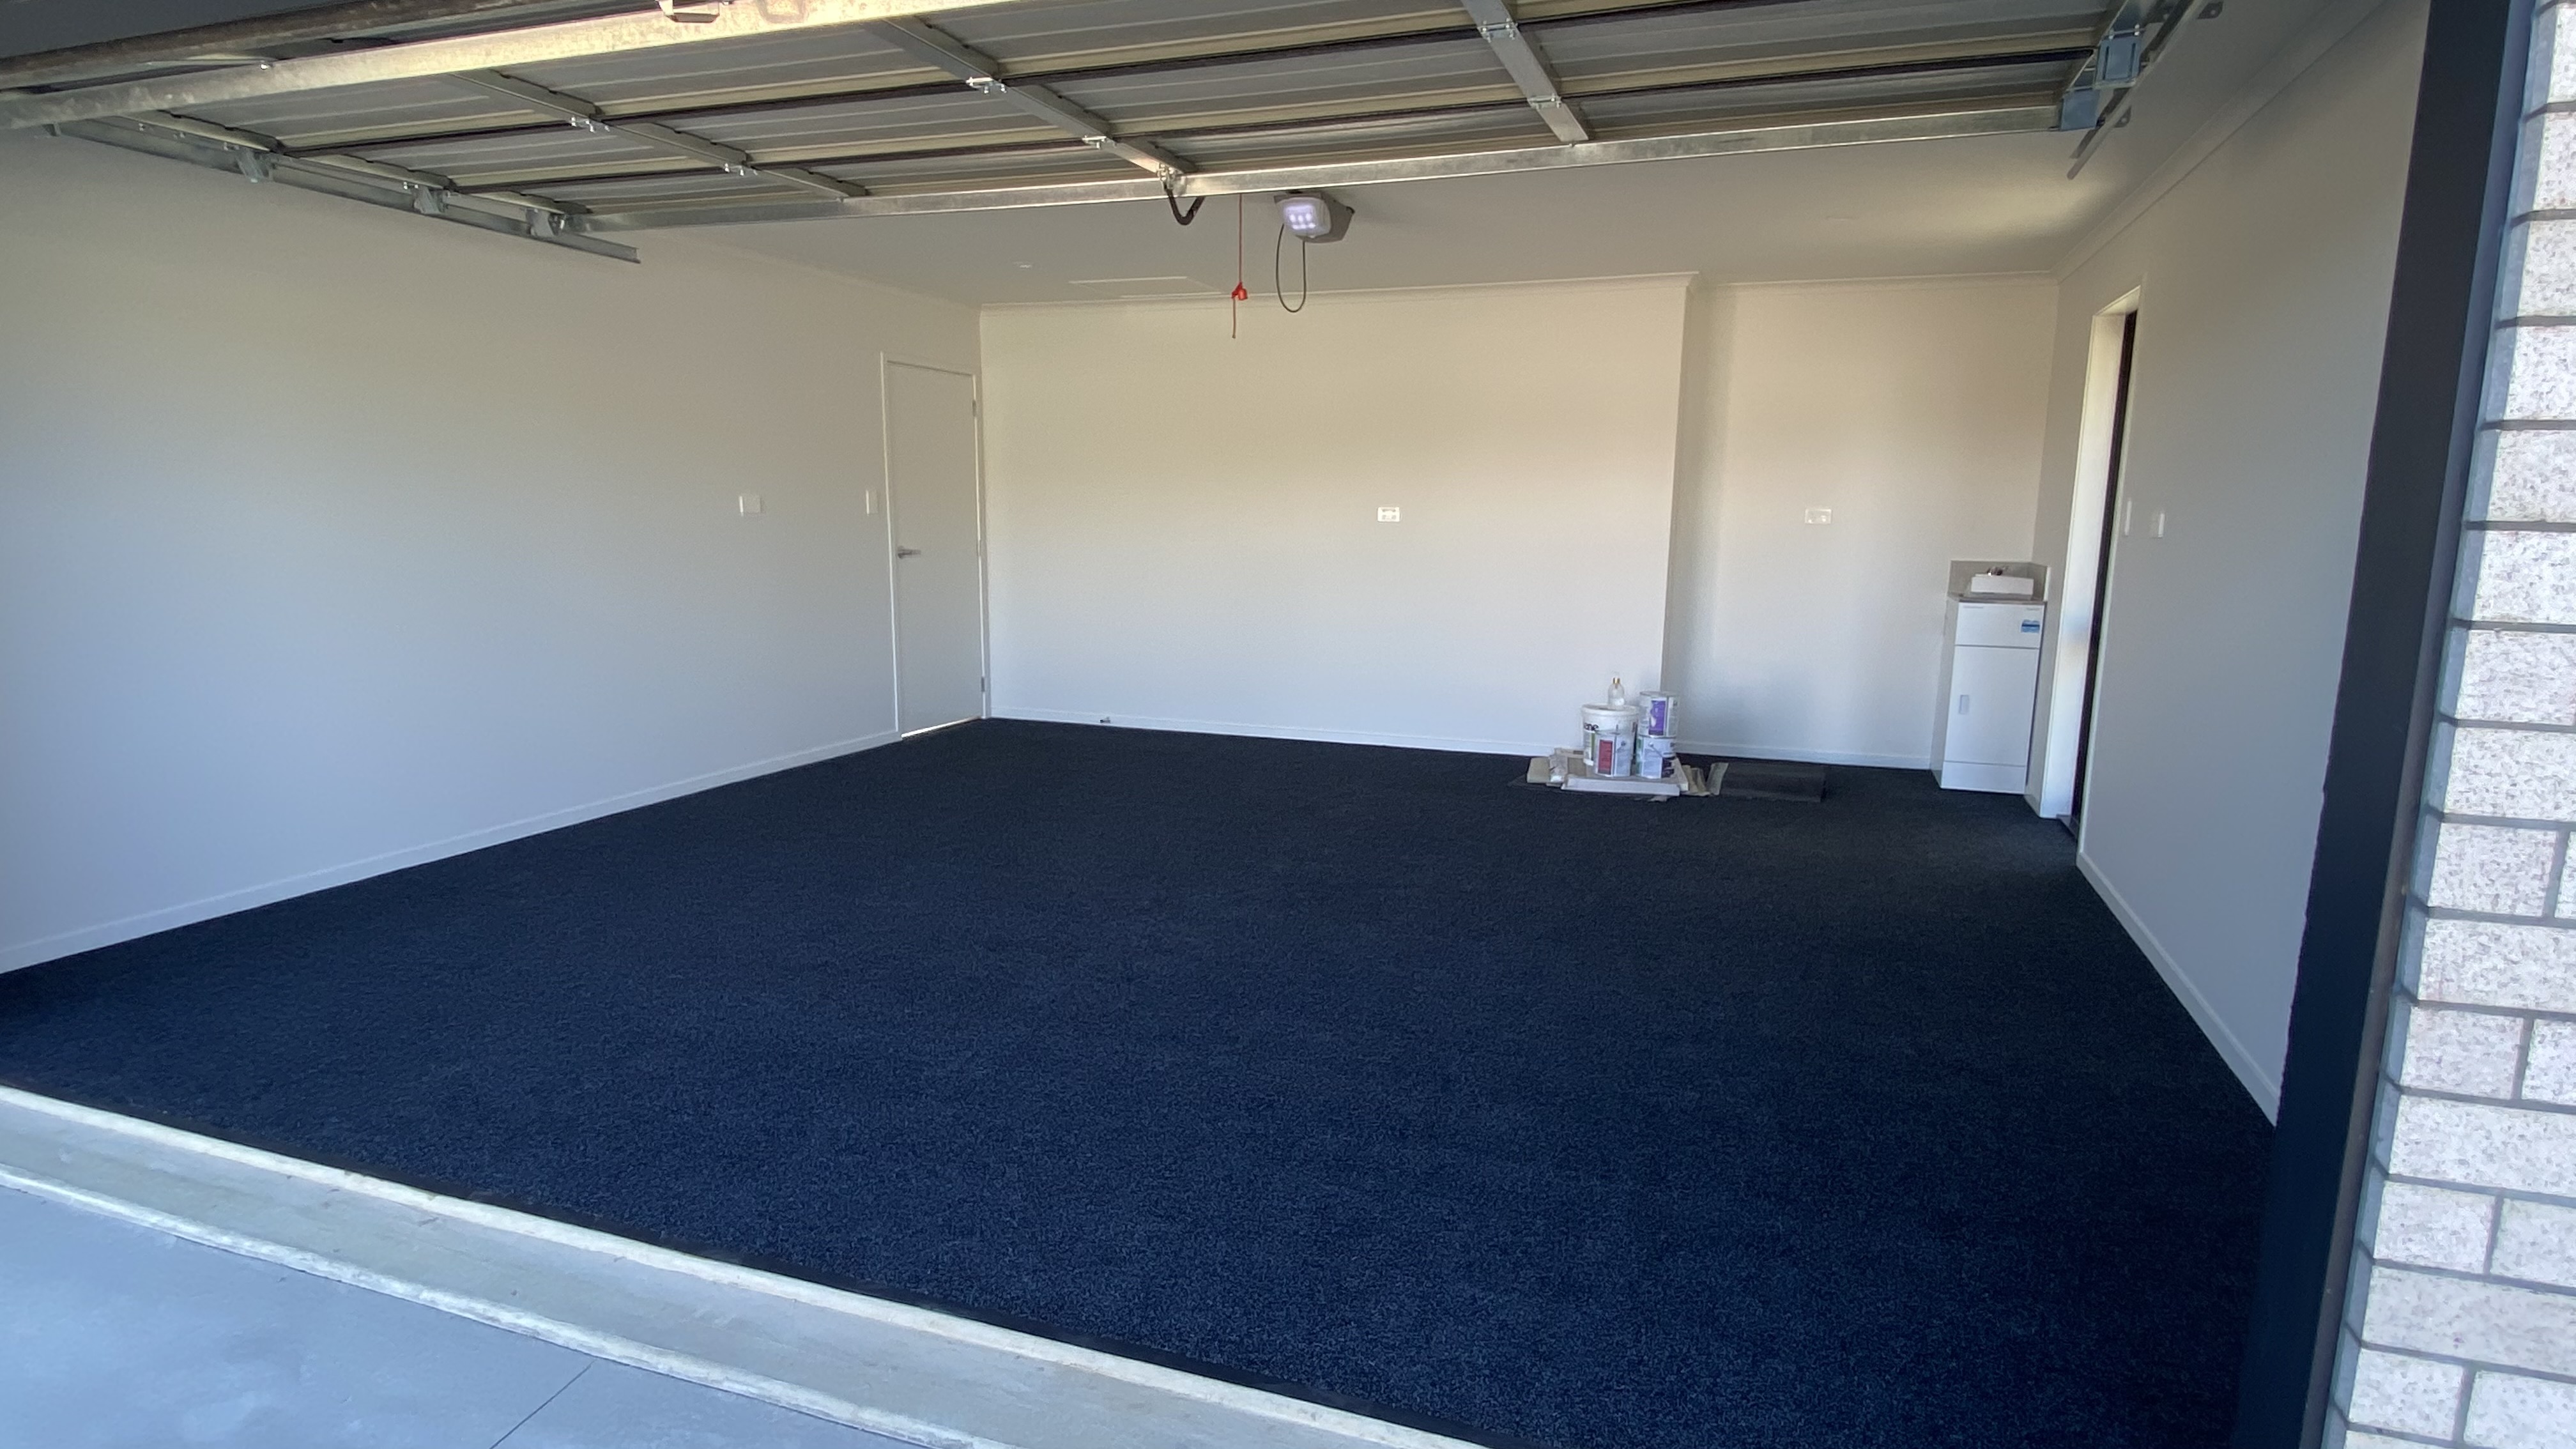 Carpet laying solutions for garages and outdoor spaces in Auckland